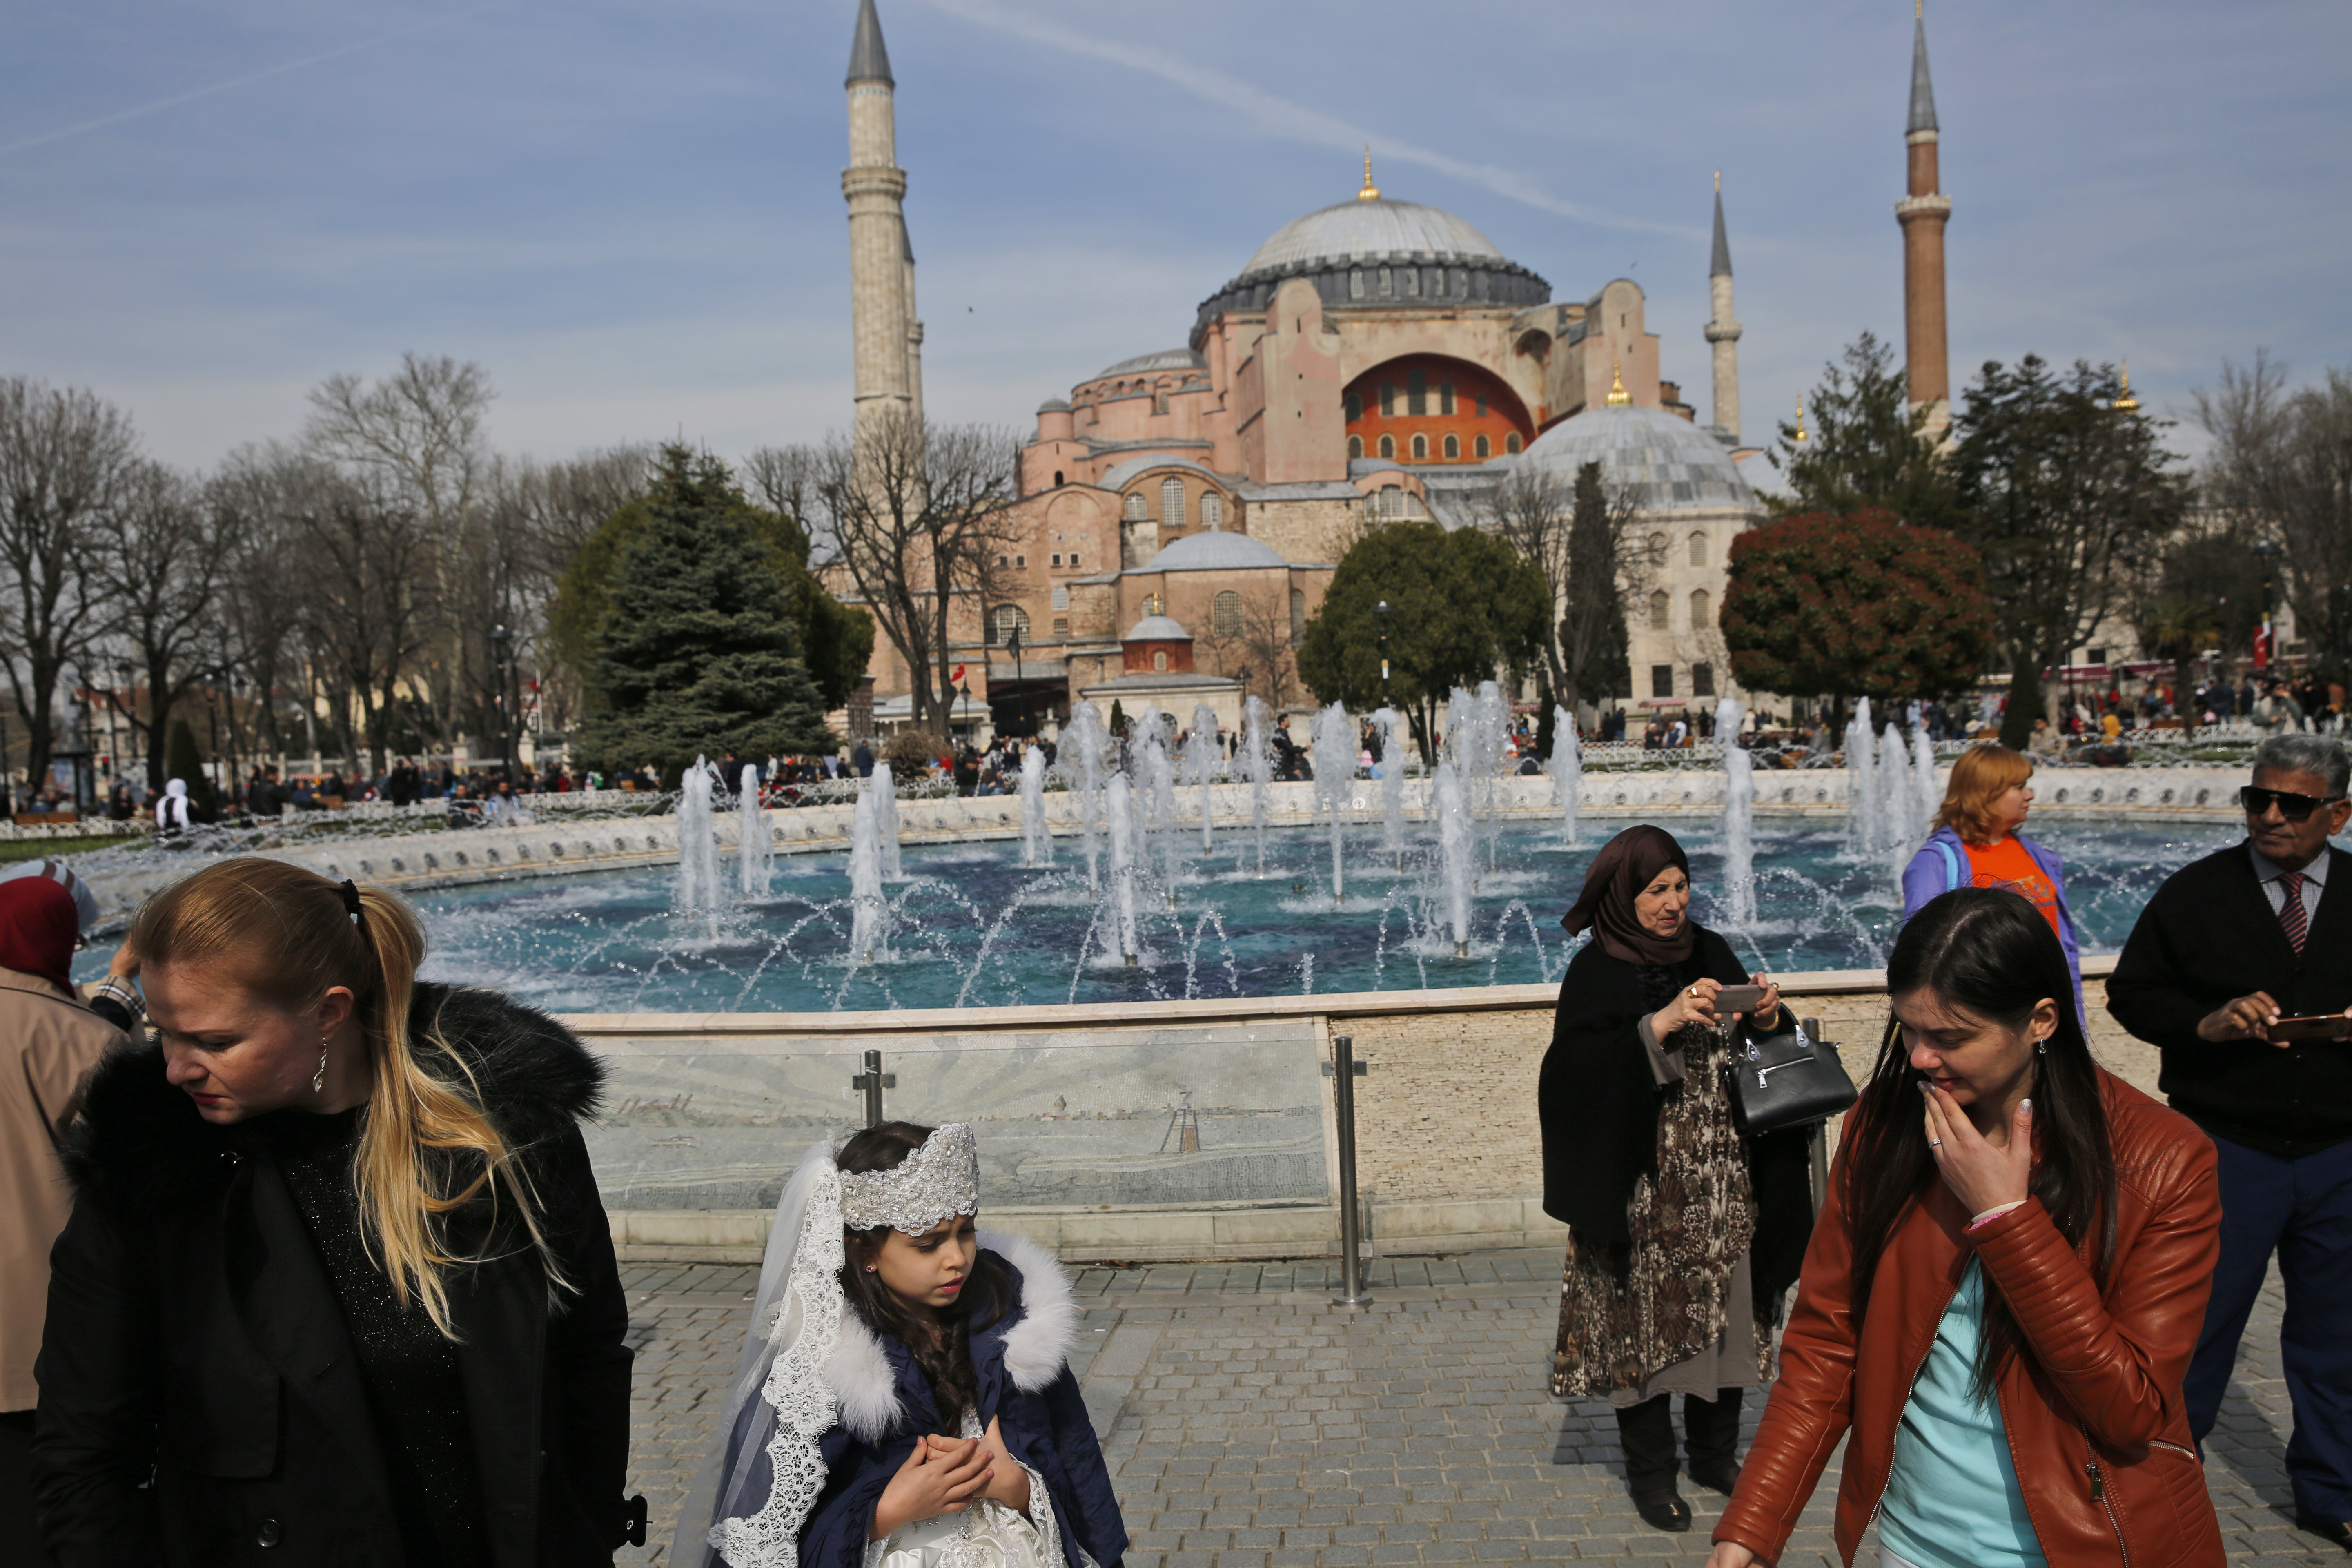 FILE - In this Friday, March 24, 2017 file photo, people walk backdropped by the Byzantine-era Hagia Sophia, one of Istanbul's main tourist attractions, in the historic Sultanahmet district of Istanbul. The 6th-century building is now at the center of a heated debate between conservative groups who want it to be reconverted into a mosque and those who believe the World Heritage site should remain a museum. (AP Photo/Lefteris Pitarakis, File)